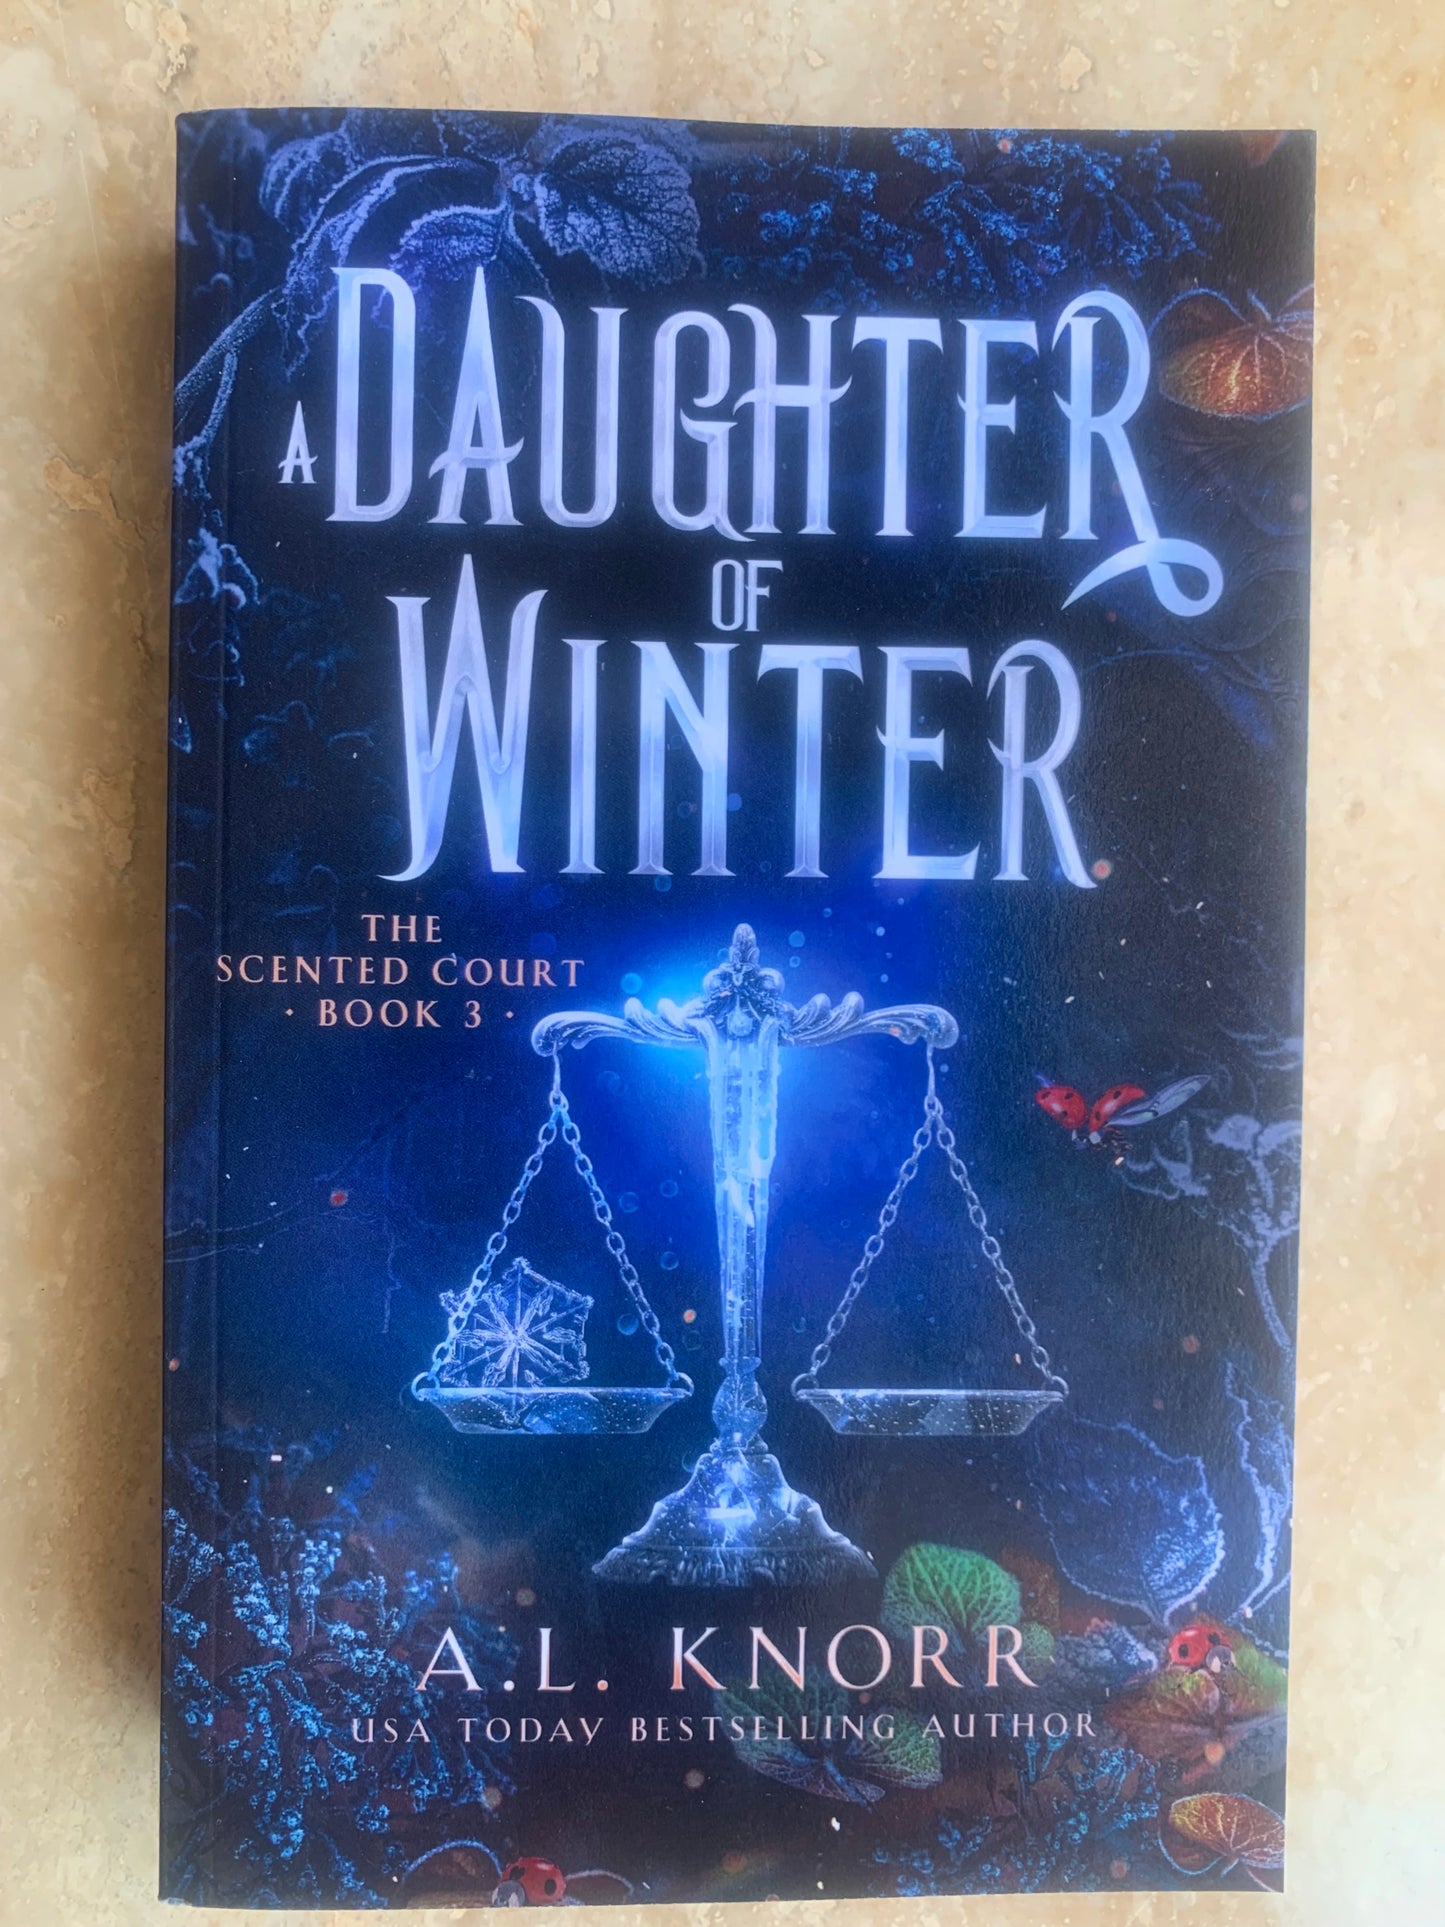 Daughter of Winter paperback cover photo